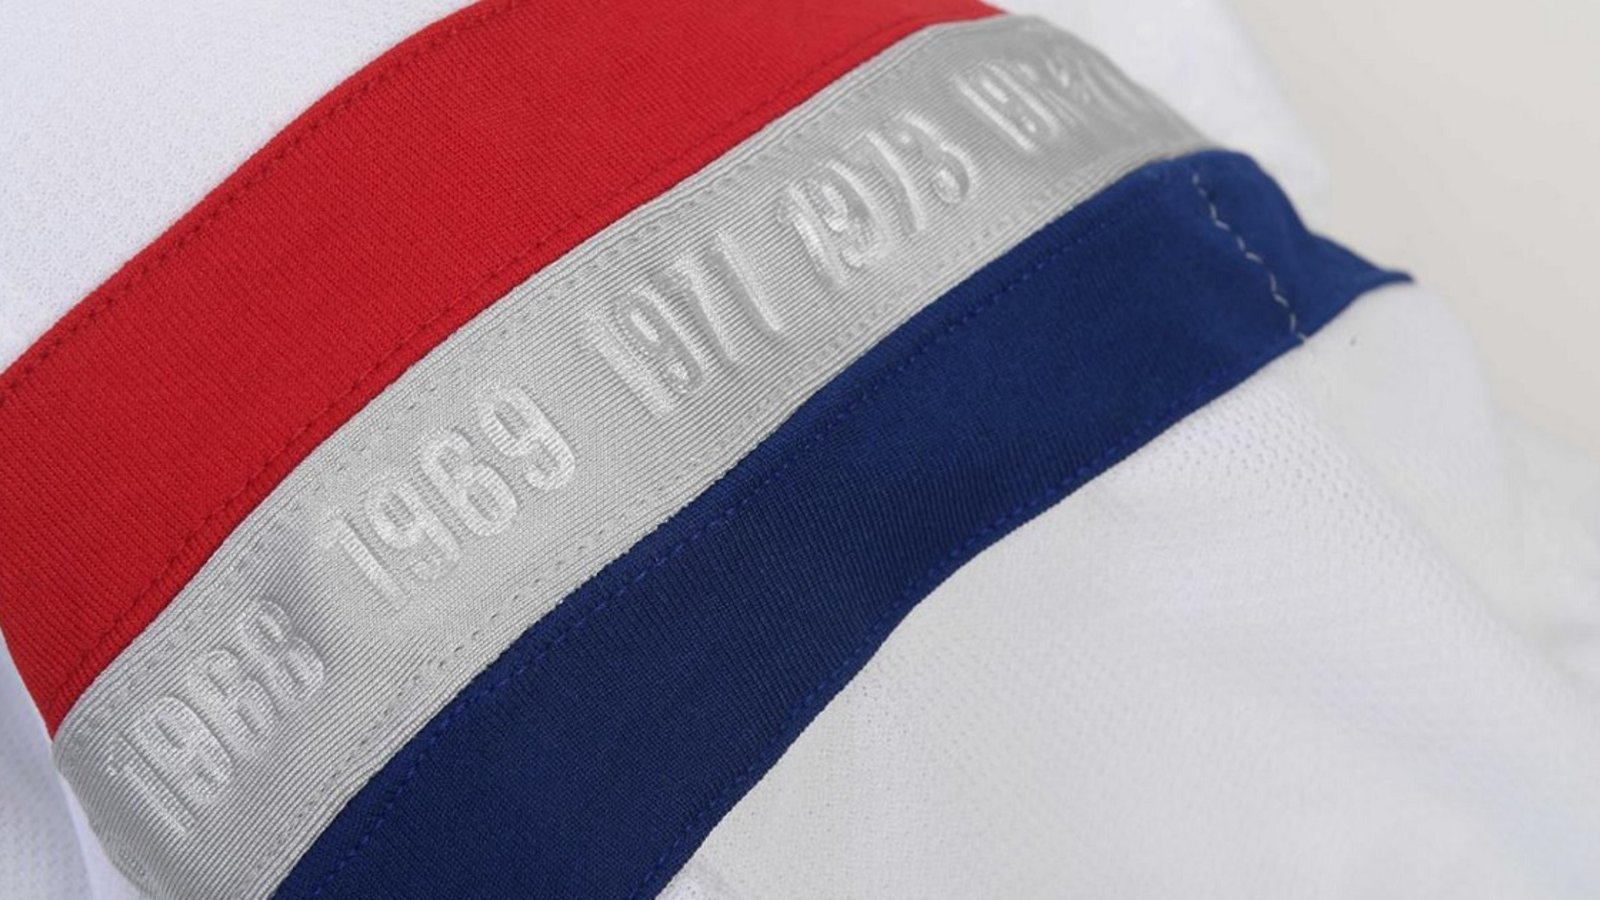 Montreal Canadiens unveil their centennial jersey. 